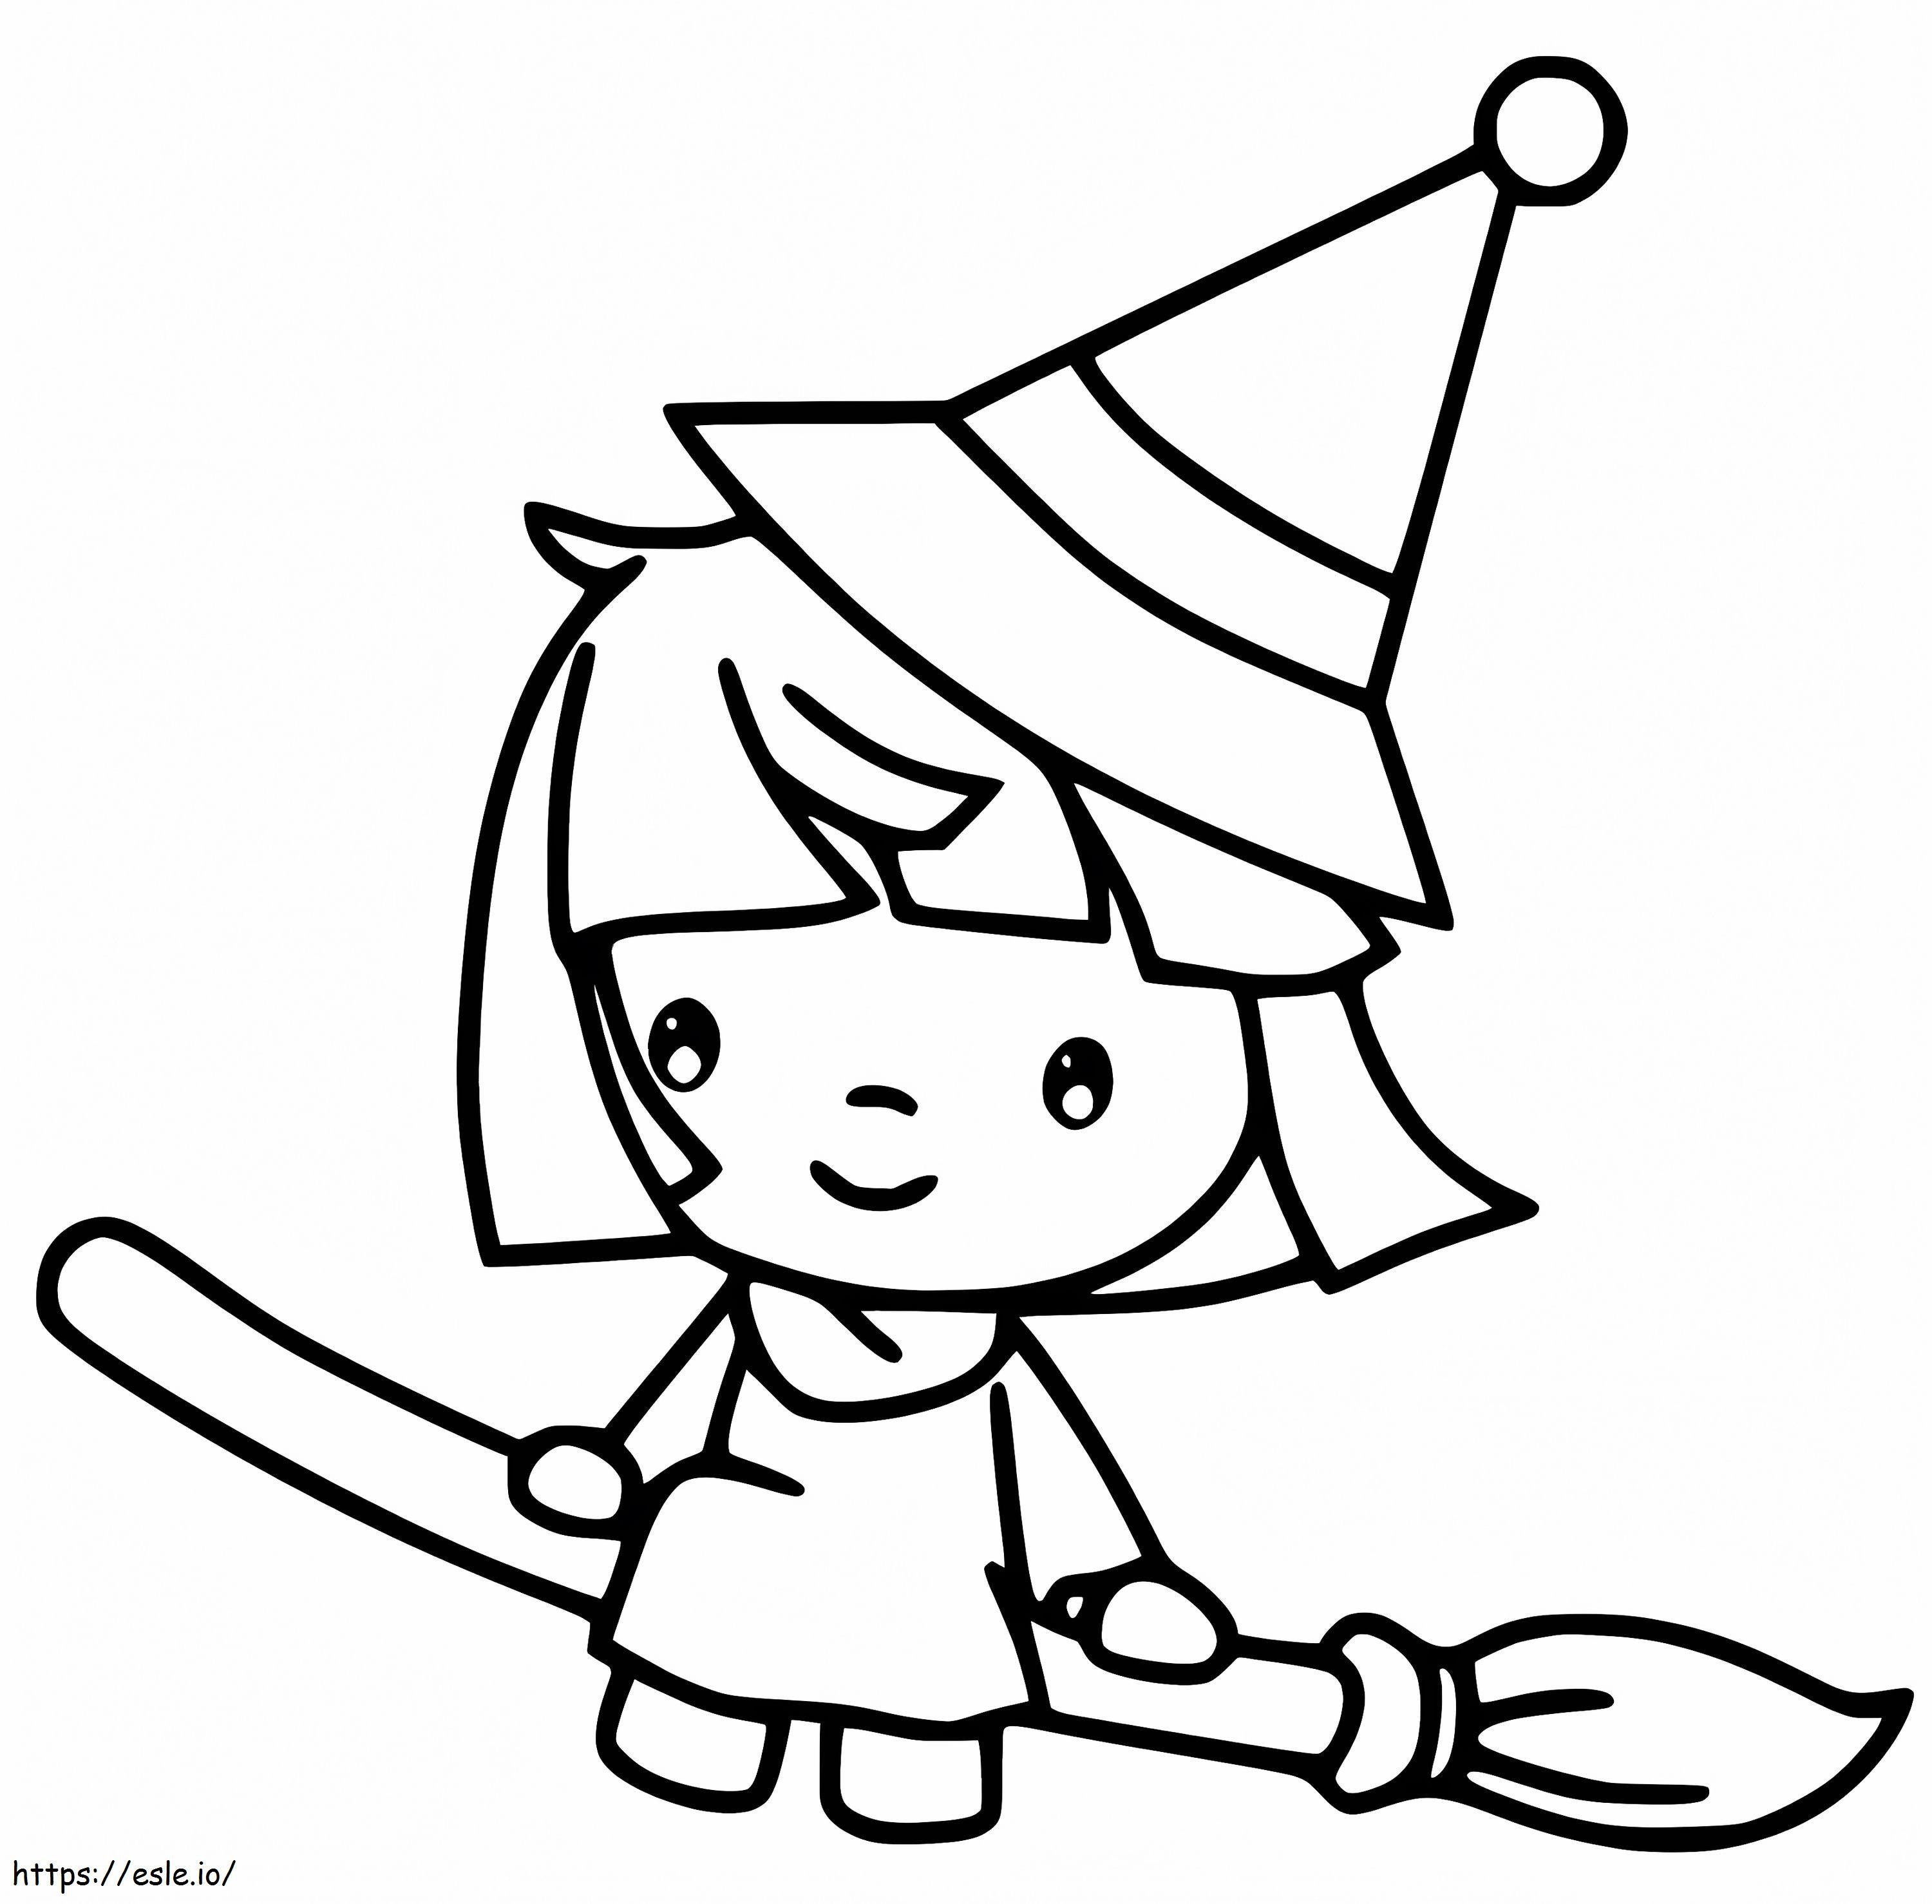 Cute Halloween Witch On Broom coloring page